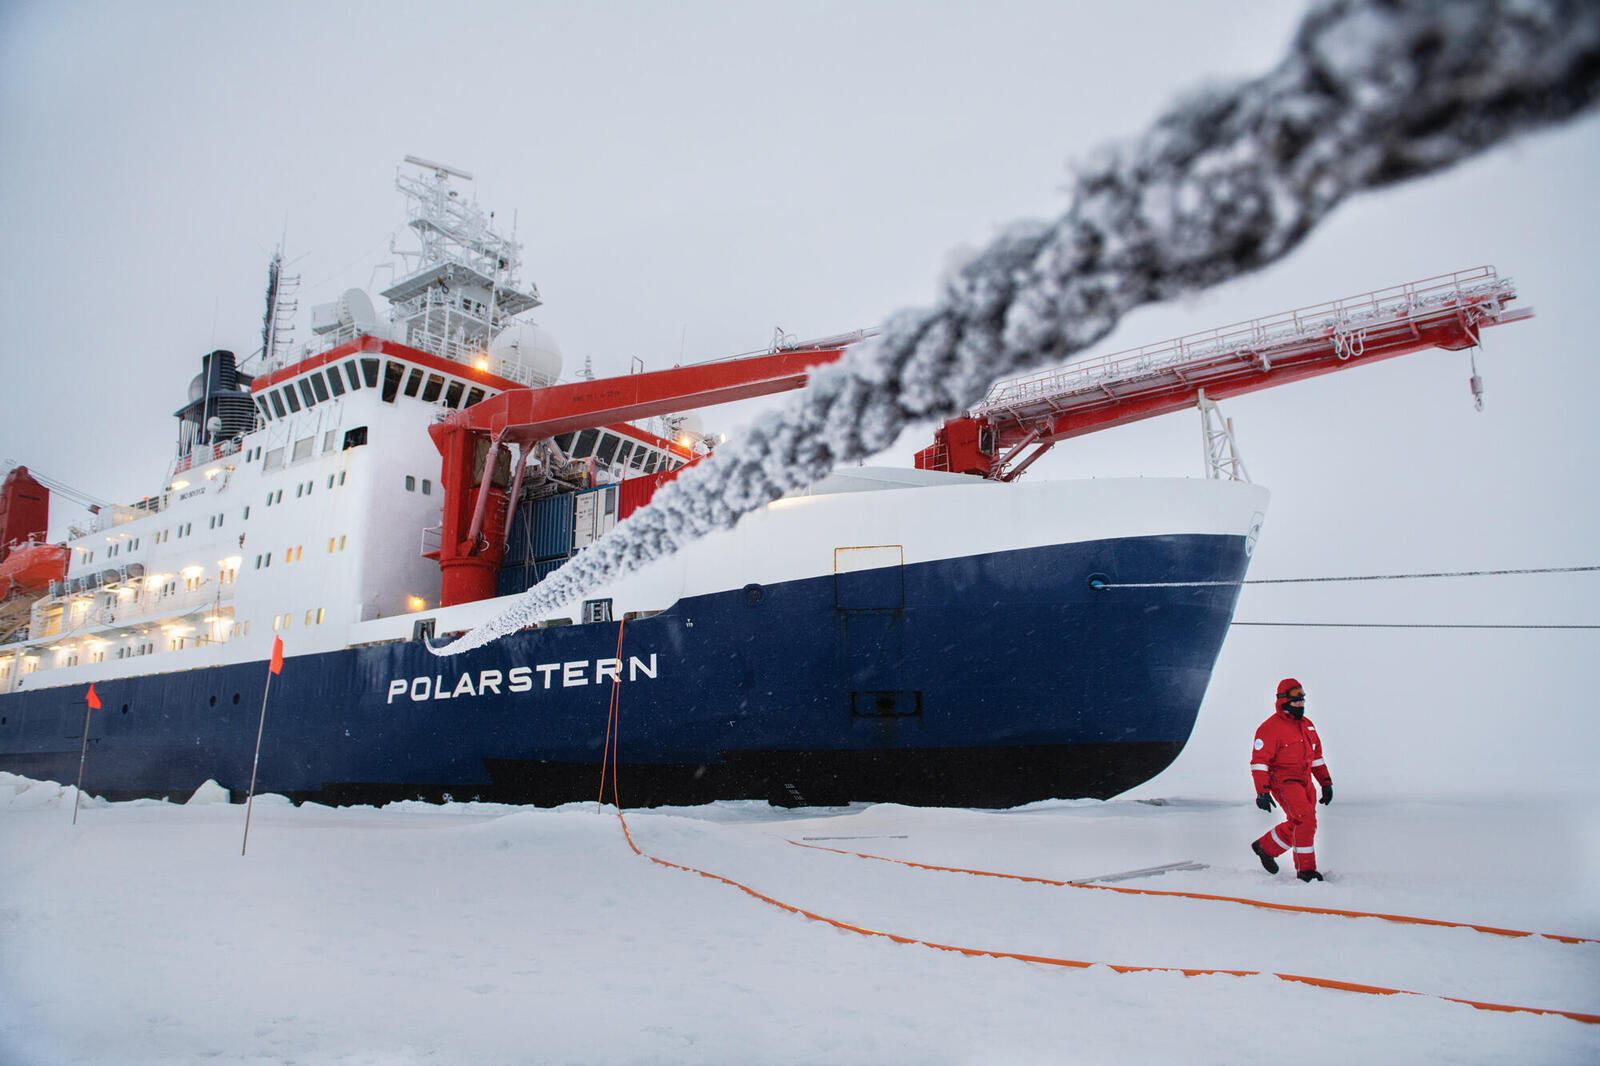 Ship in ice with crewperson walking outside